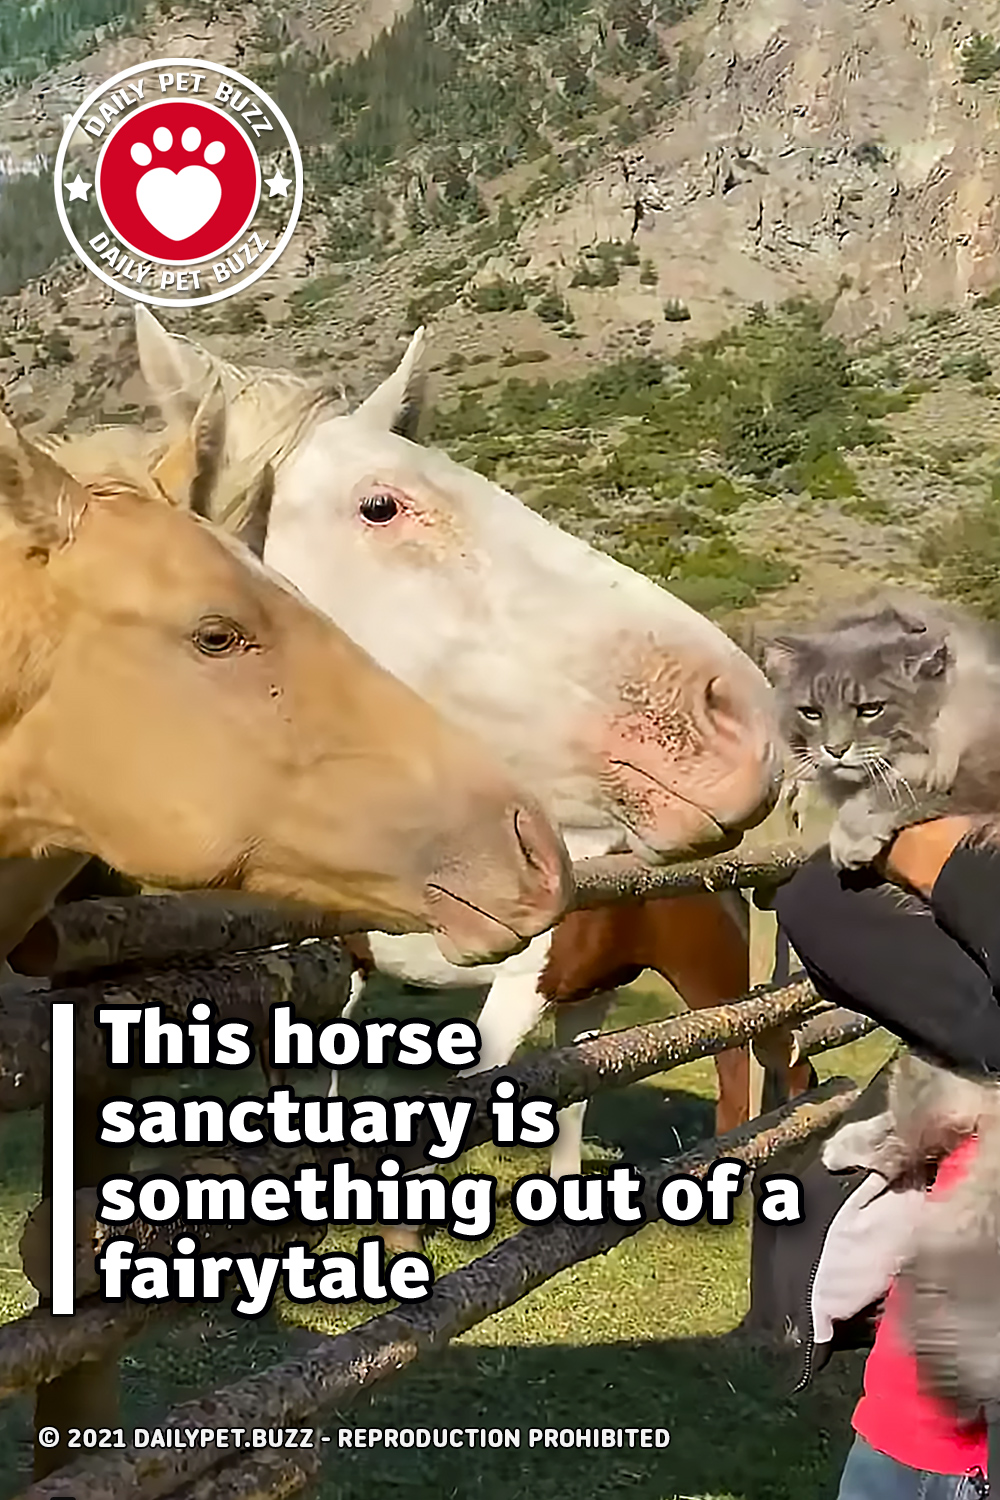 This horse sanctuary is something out of a fairytale